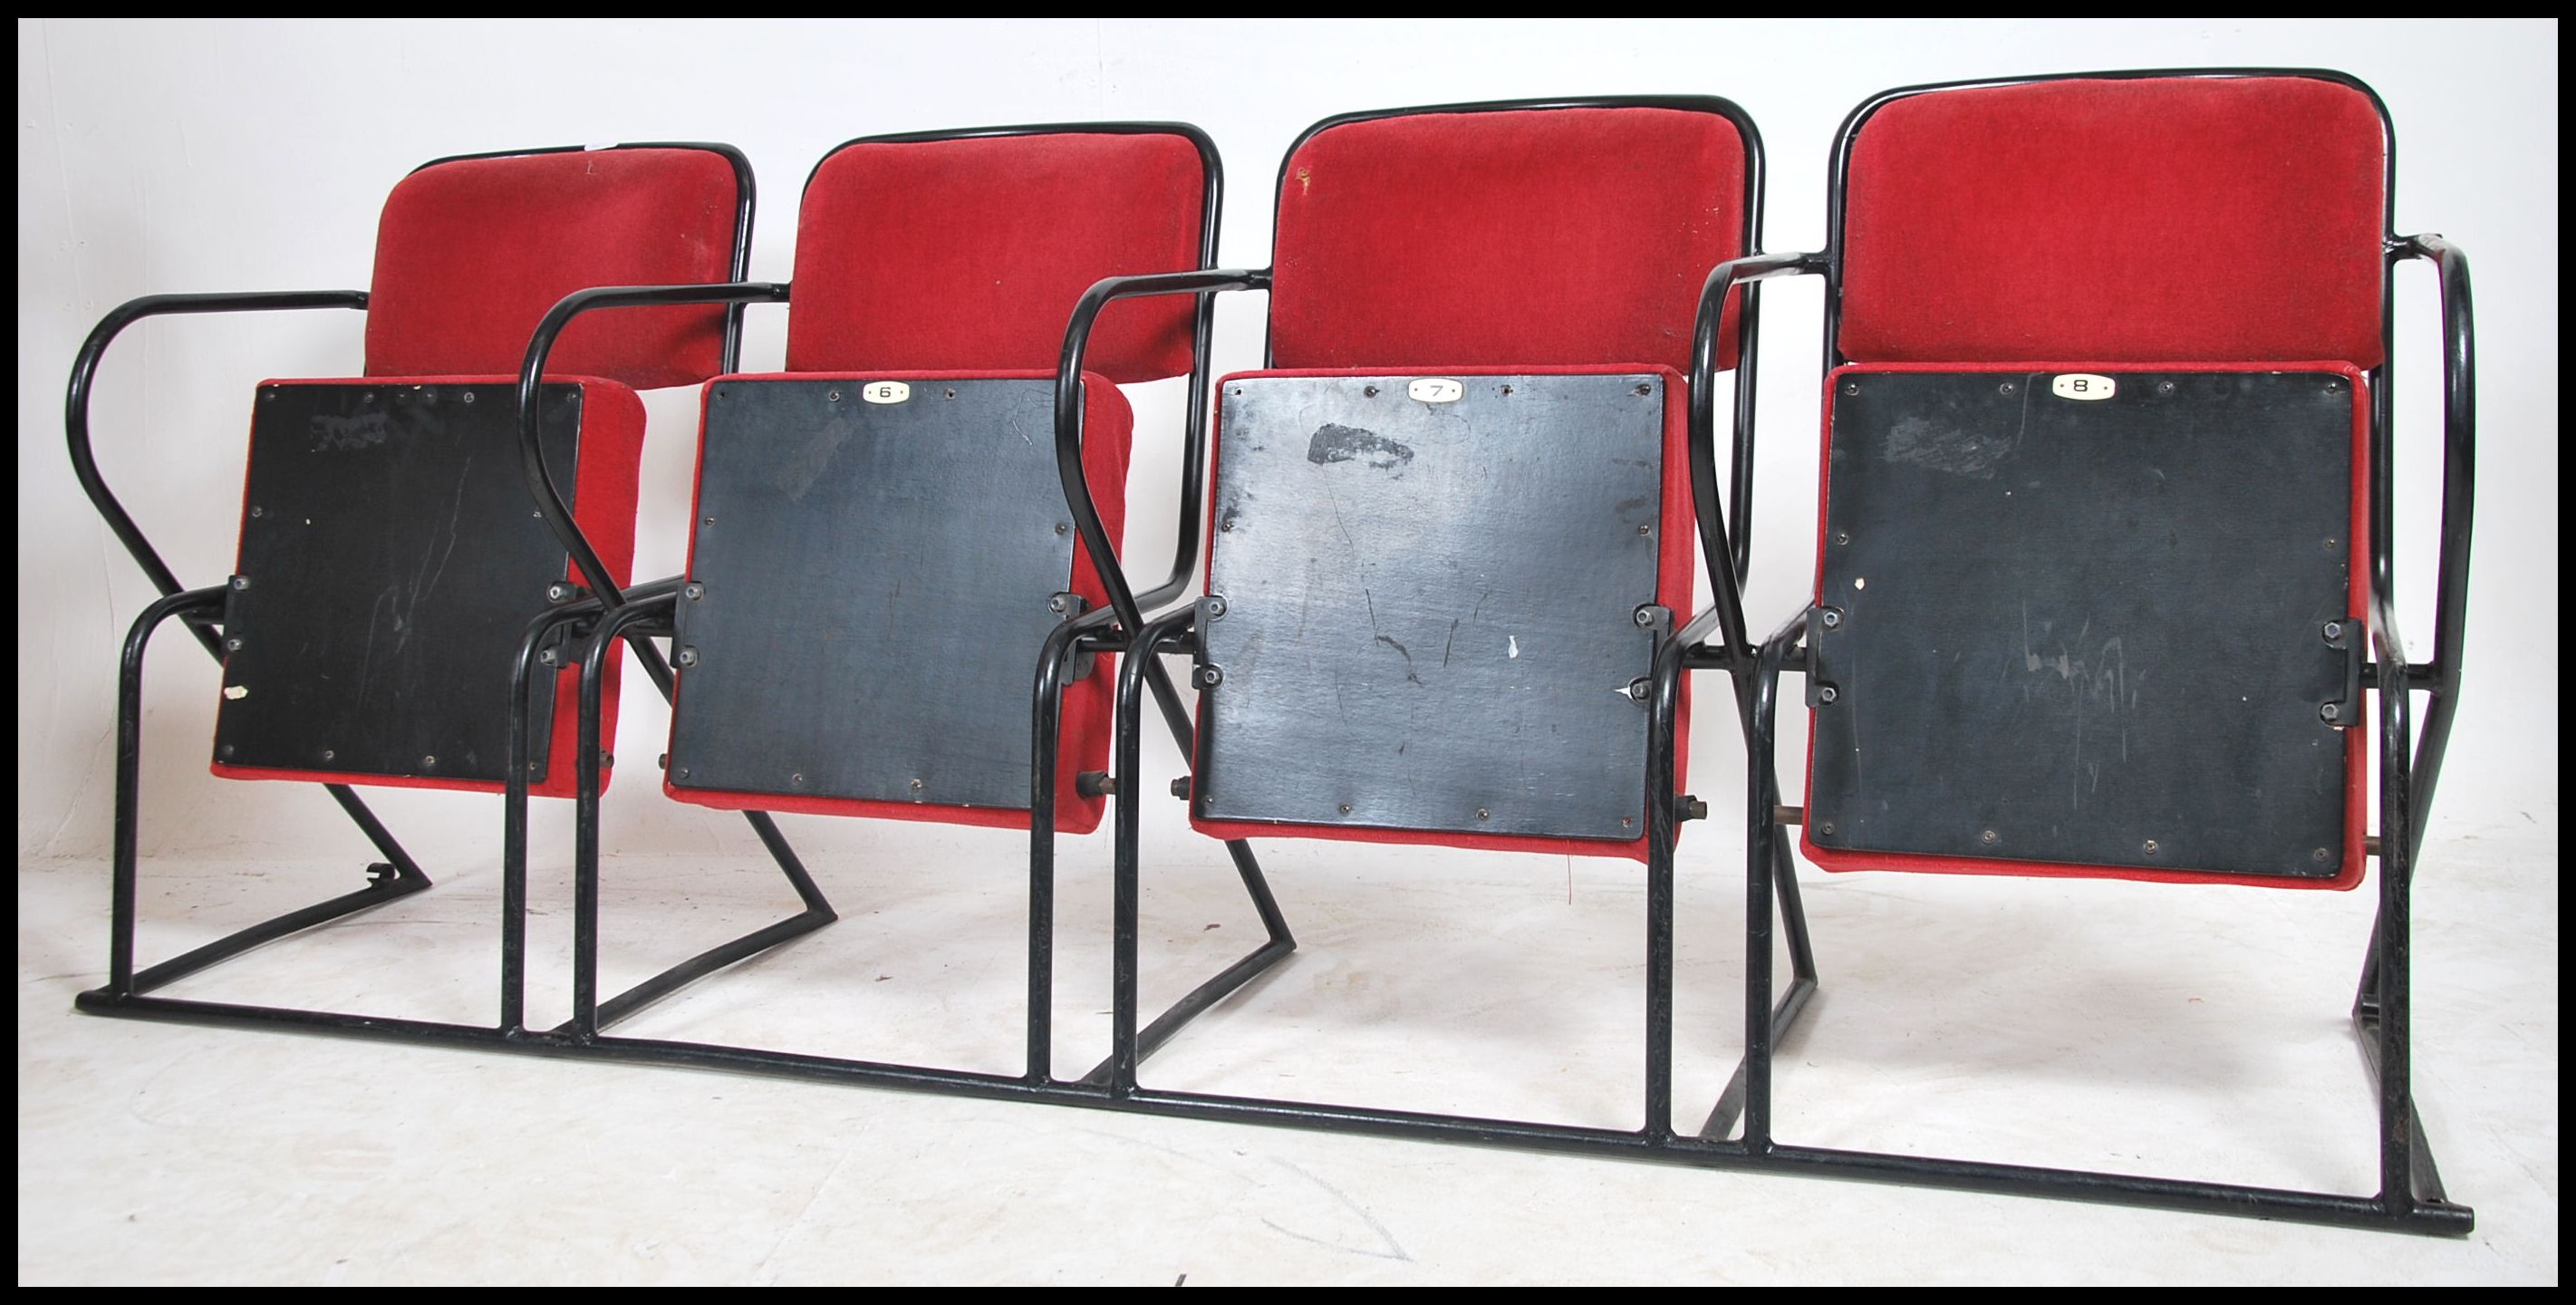 A set of 4 - run of 4 retro 20th century folding cinema chairs upholstered in red moquette fabric